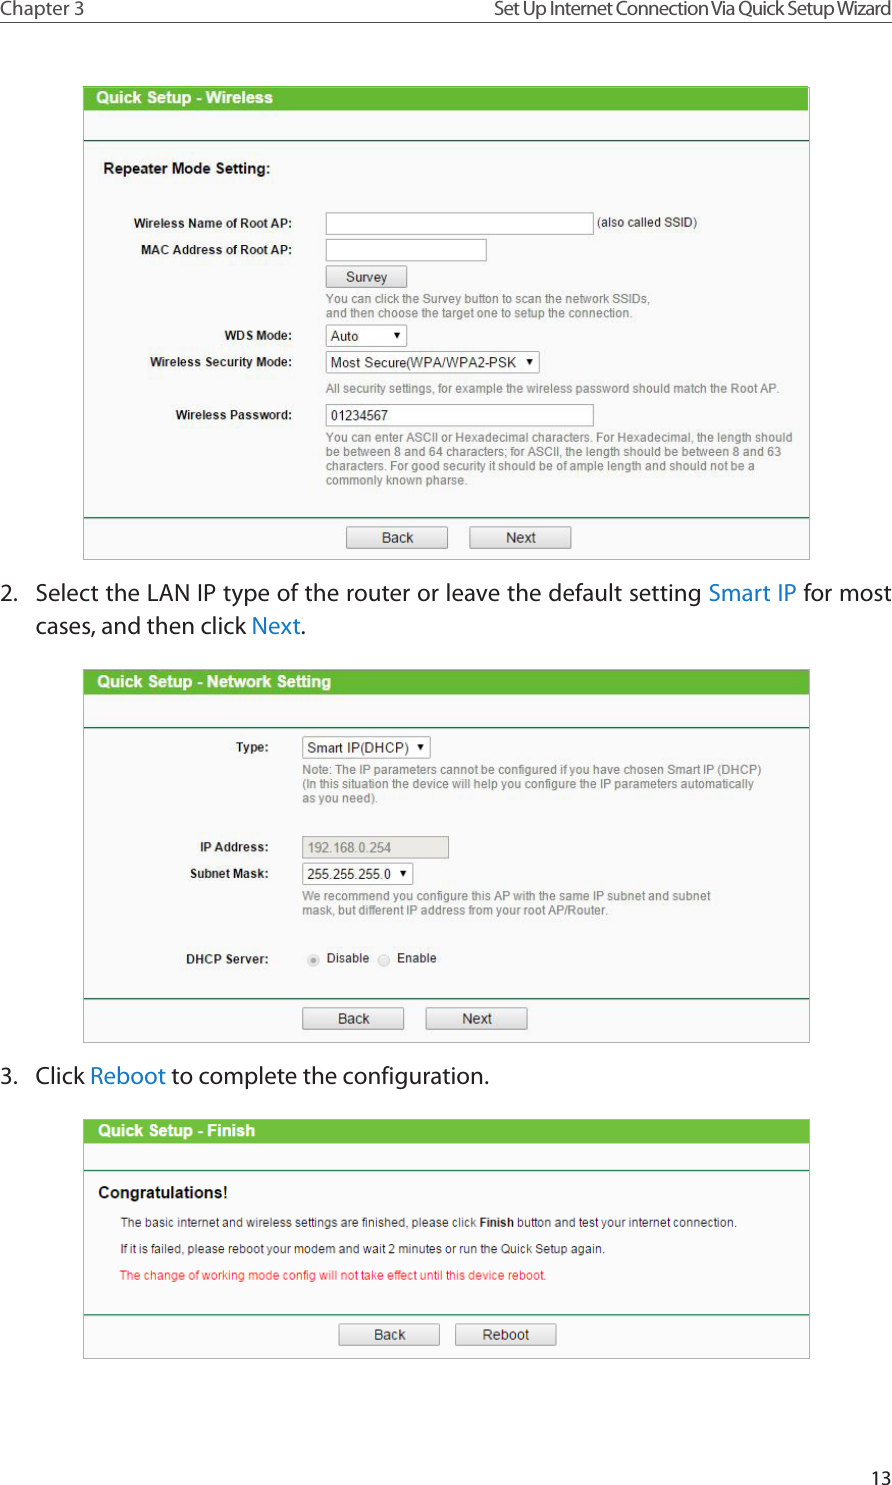 13Chapter 3 Set Up Internet Connection Via Quick Setup Wizard2.  Select the LAN IP type of the router or leave the default setting Smart IP for most cases, and then click Next.3.  Click Reboot to complete the configuration.